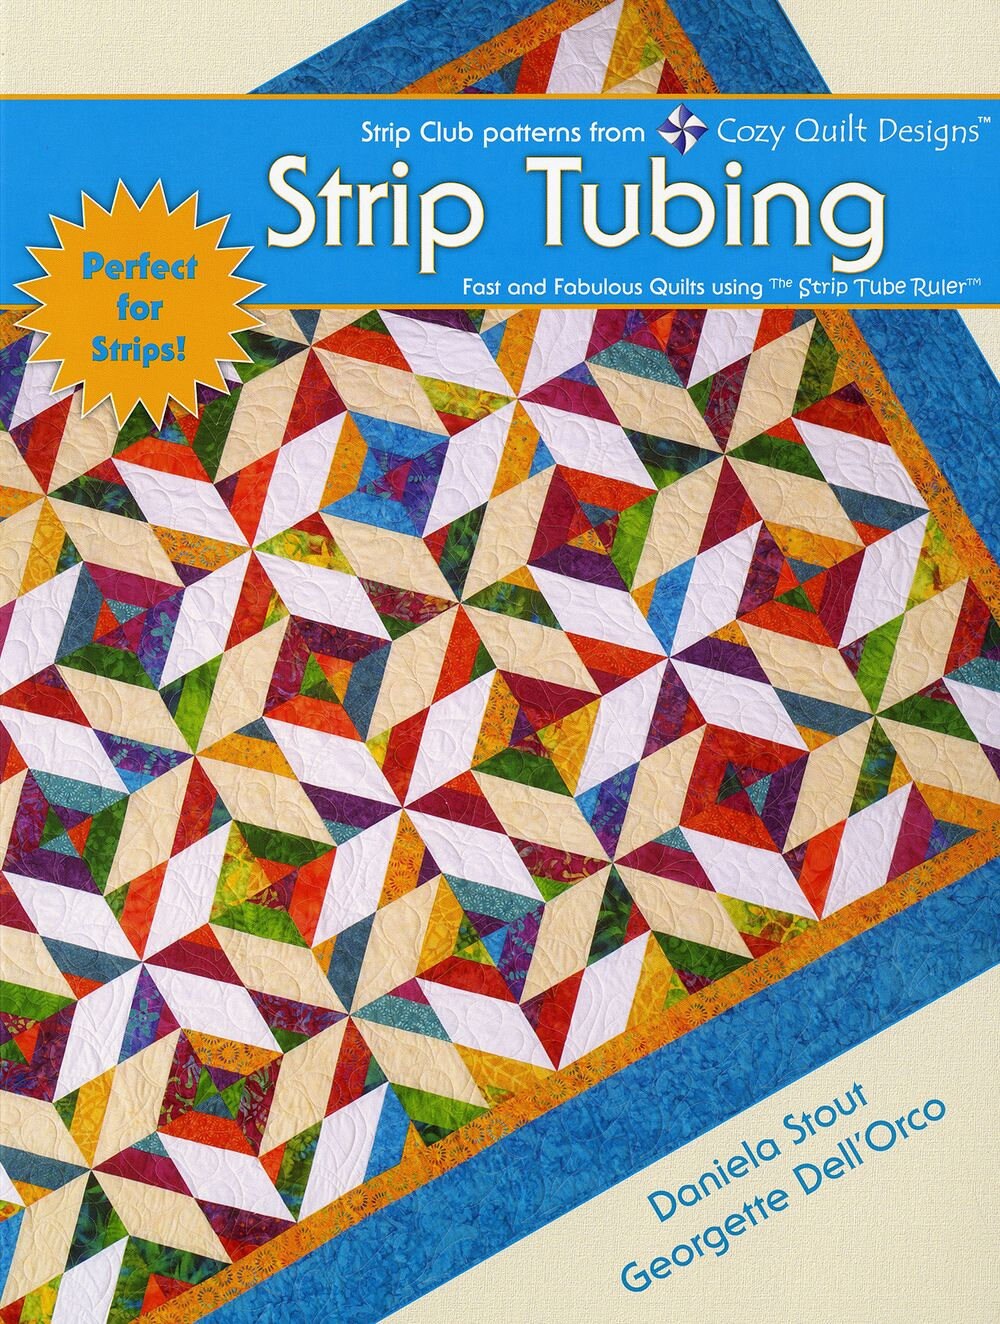 Strip Tubing Quilt Pattern Book by Daniela Stout of Cozy Quilt Designs